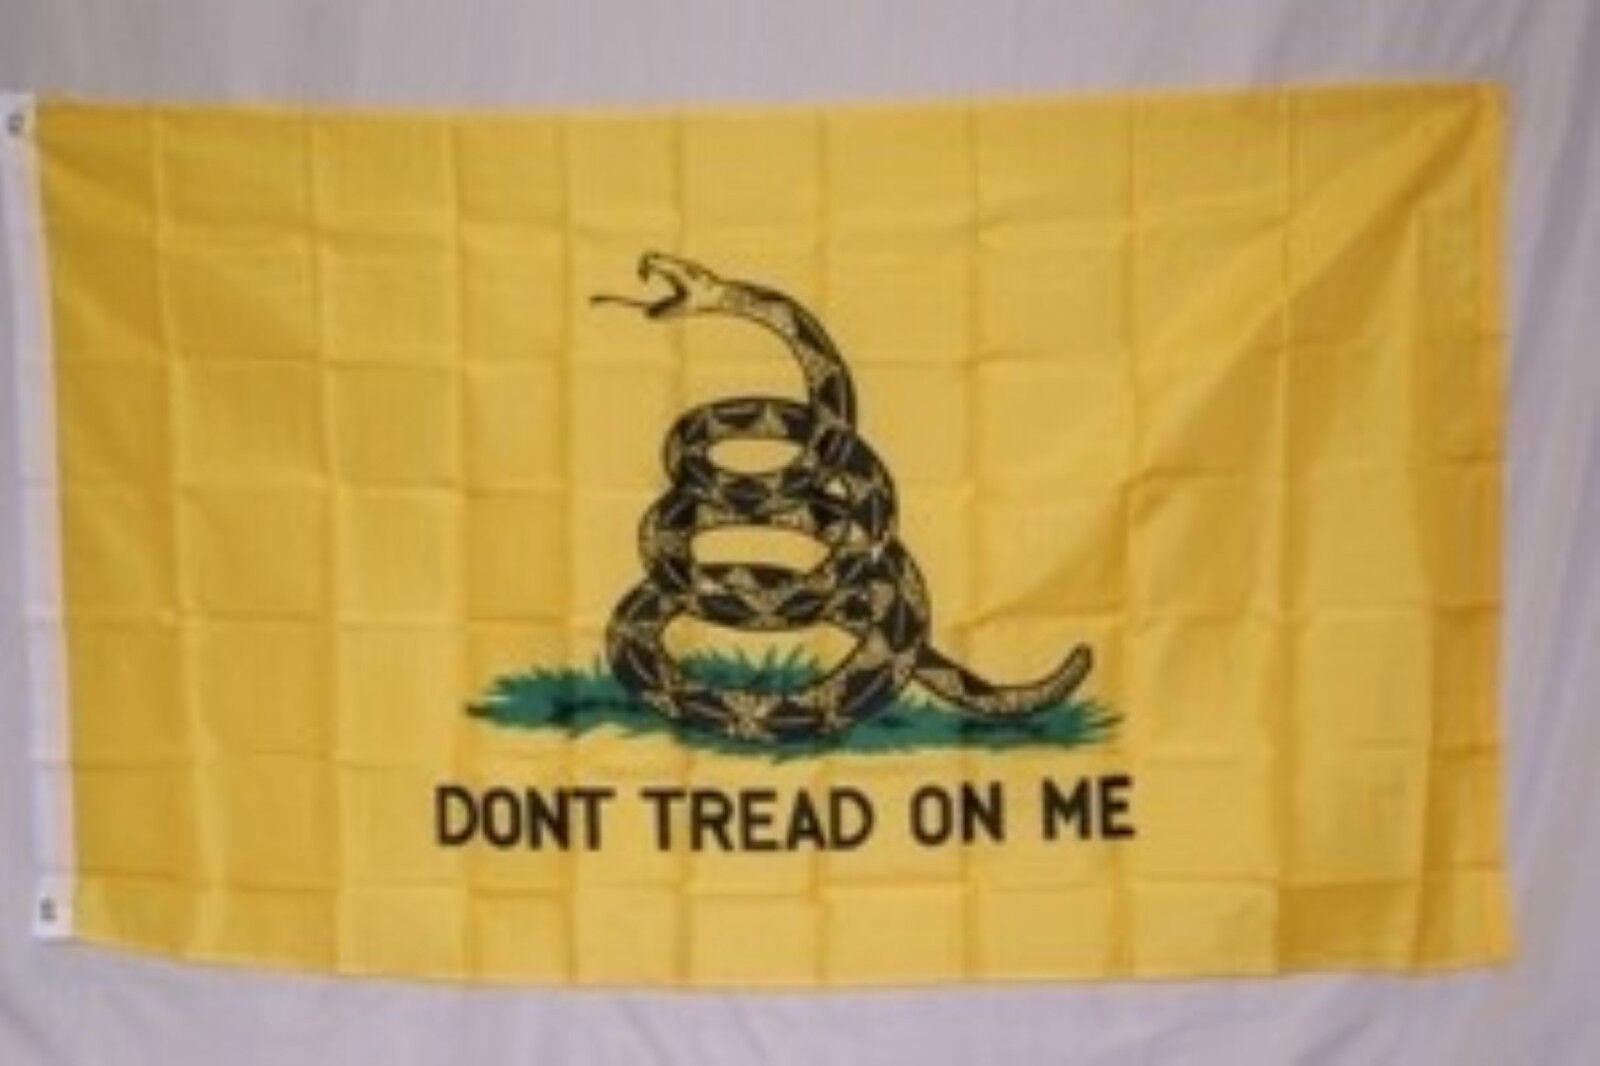  Don\'t tread on me  --- gadsden flag 3 x 5  polyester {new & unopened )